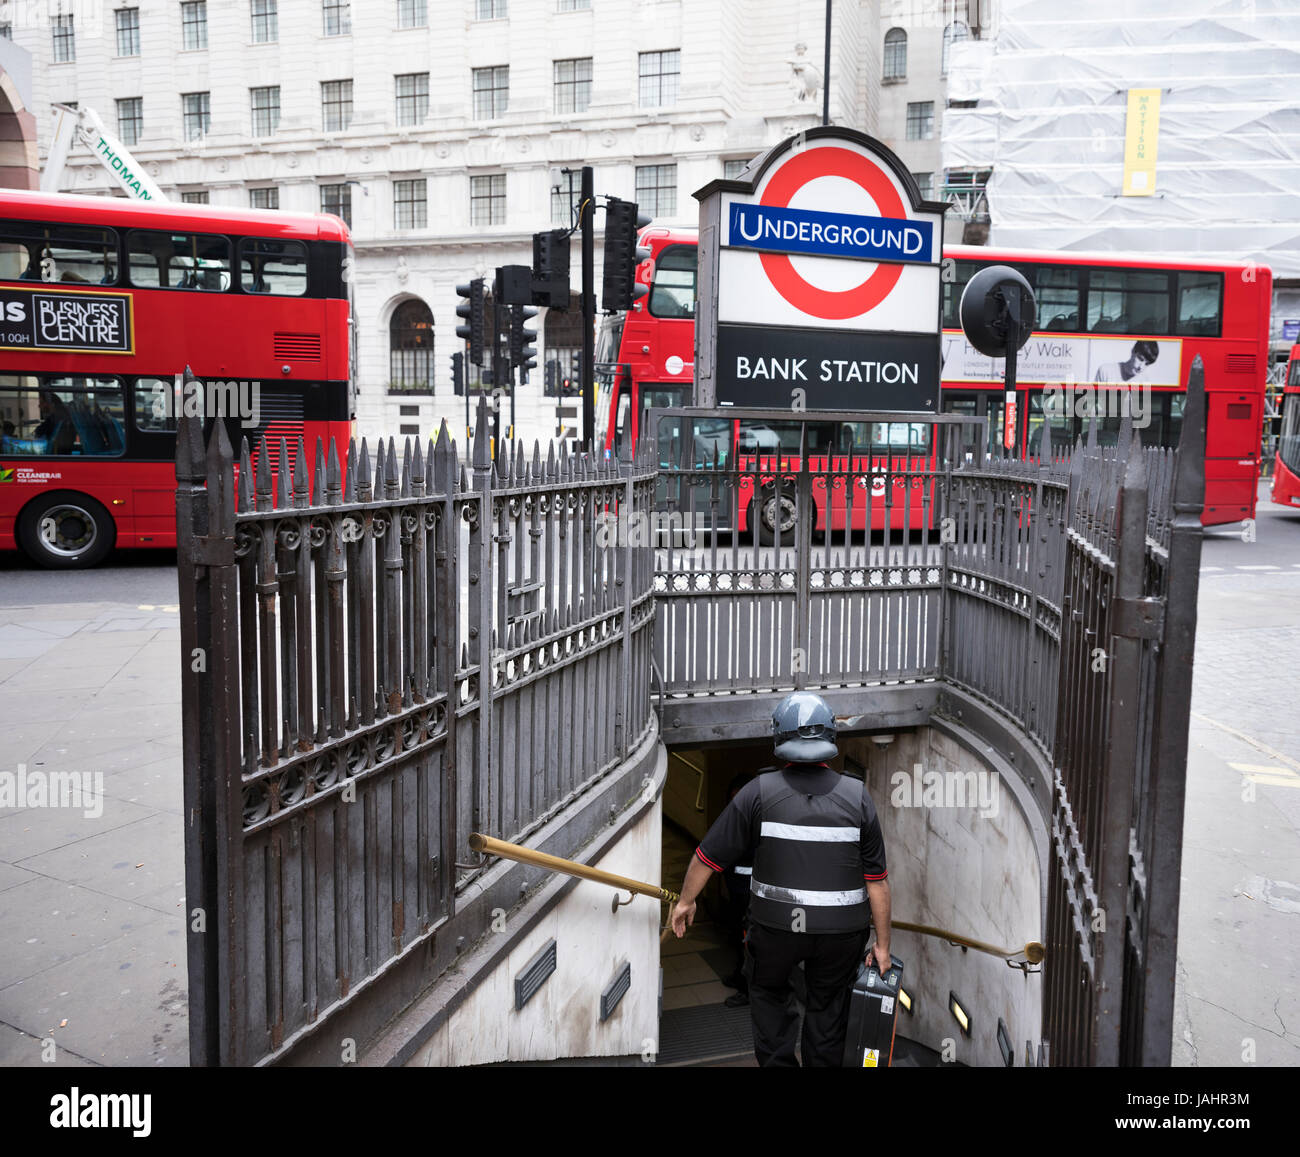 london, united kingdom, 6 may 2017: man with helmet and suitcase descends into entrance of underground station bank in london while busses pass by Stock Photo